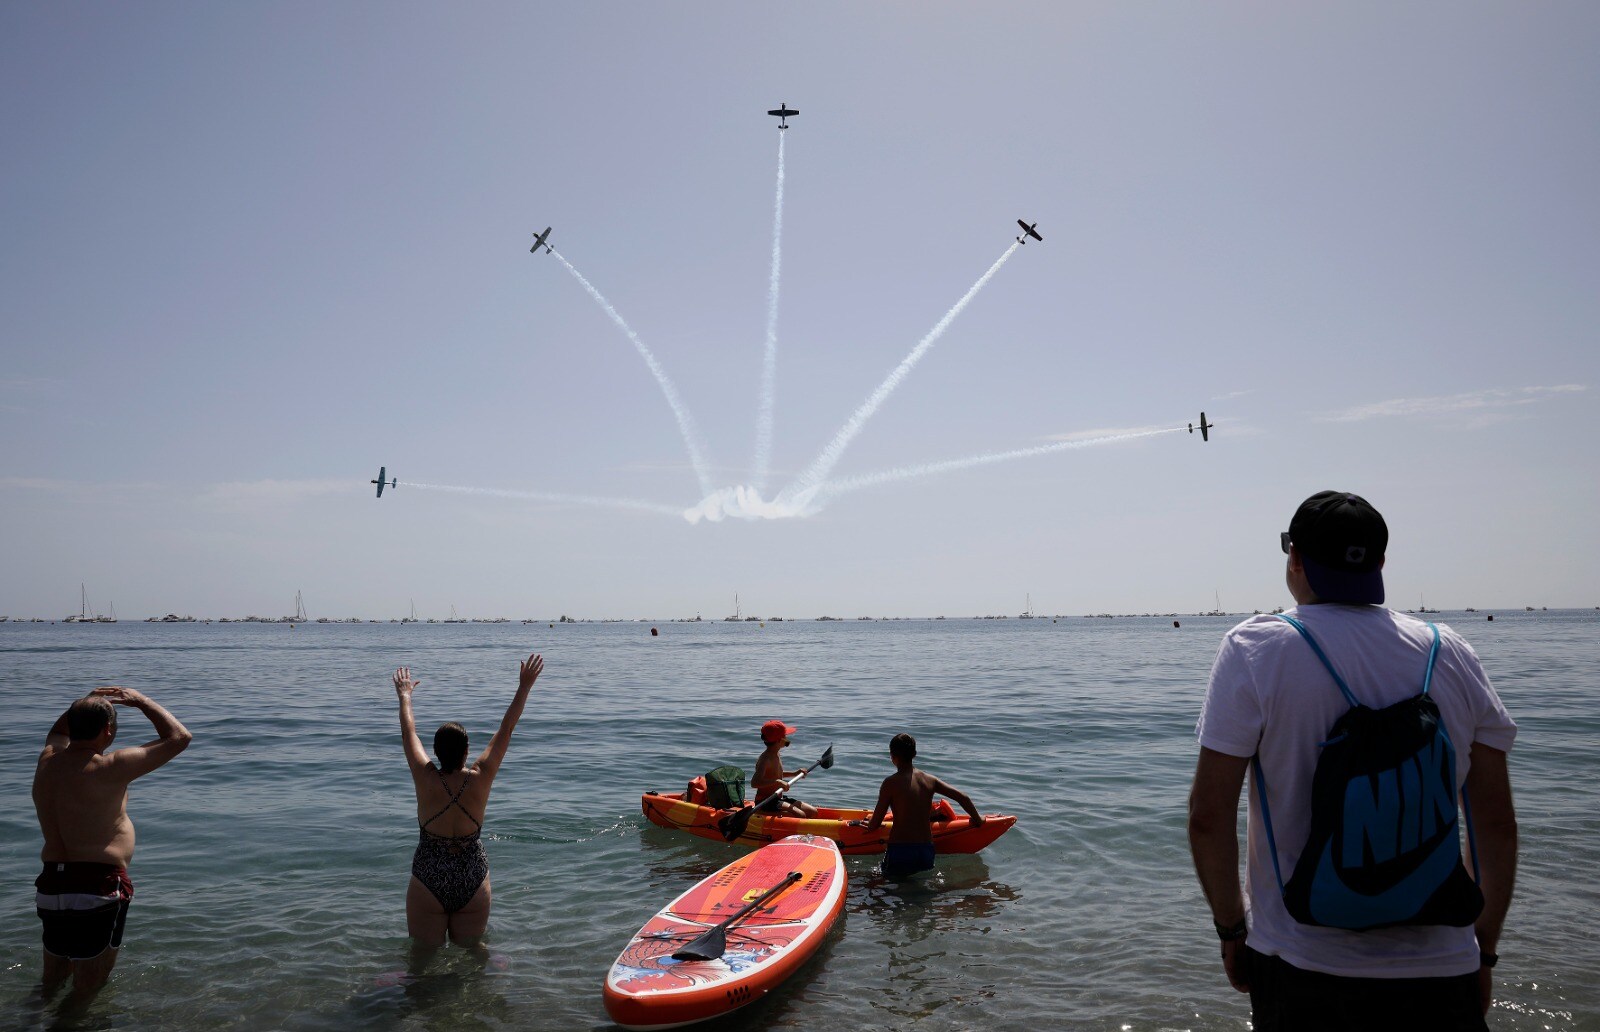 The best images from the Torre del Mar International Airshow